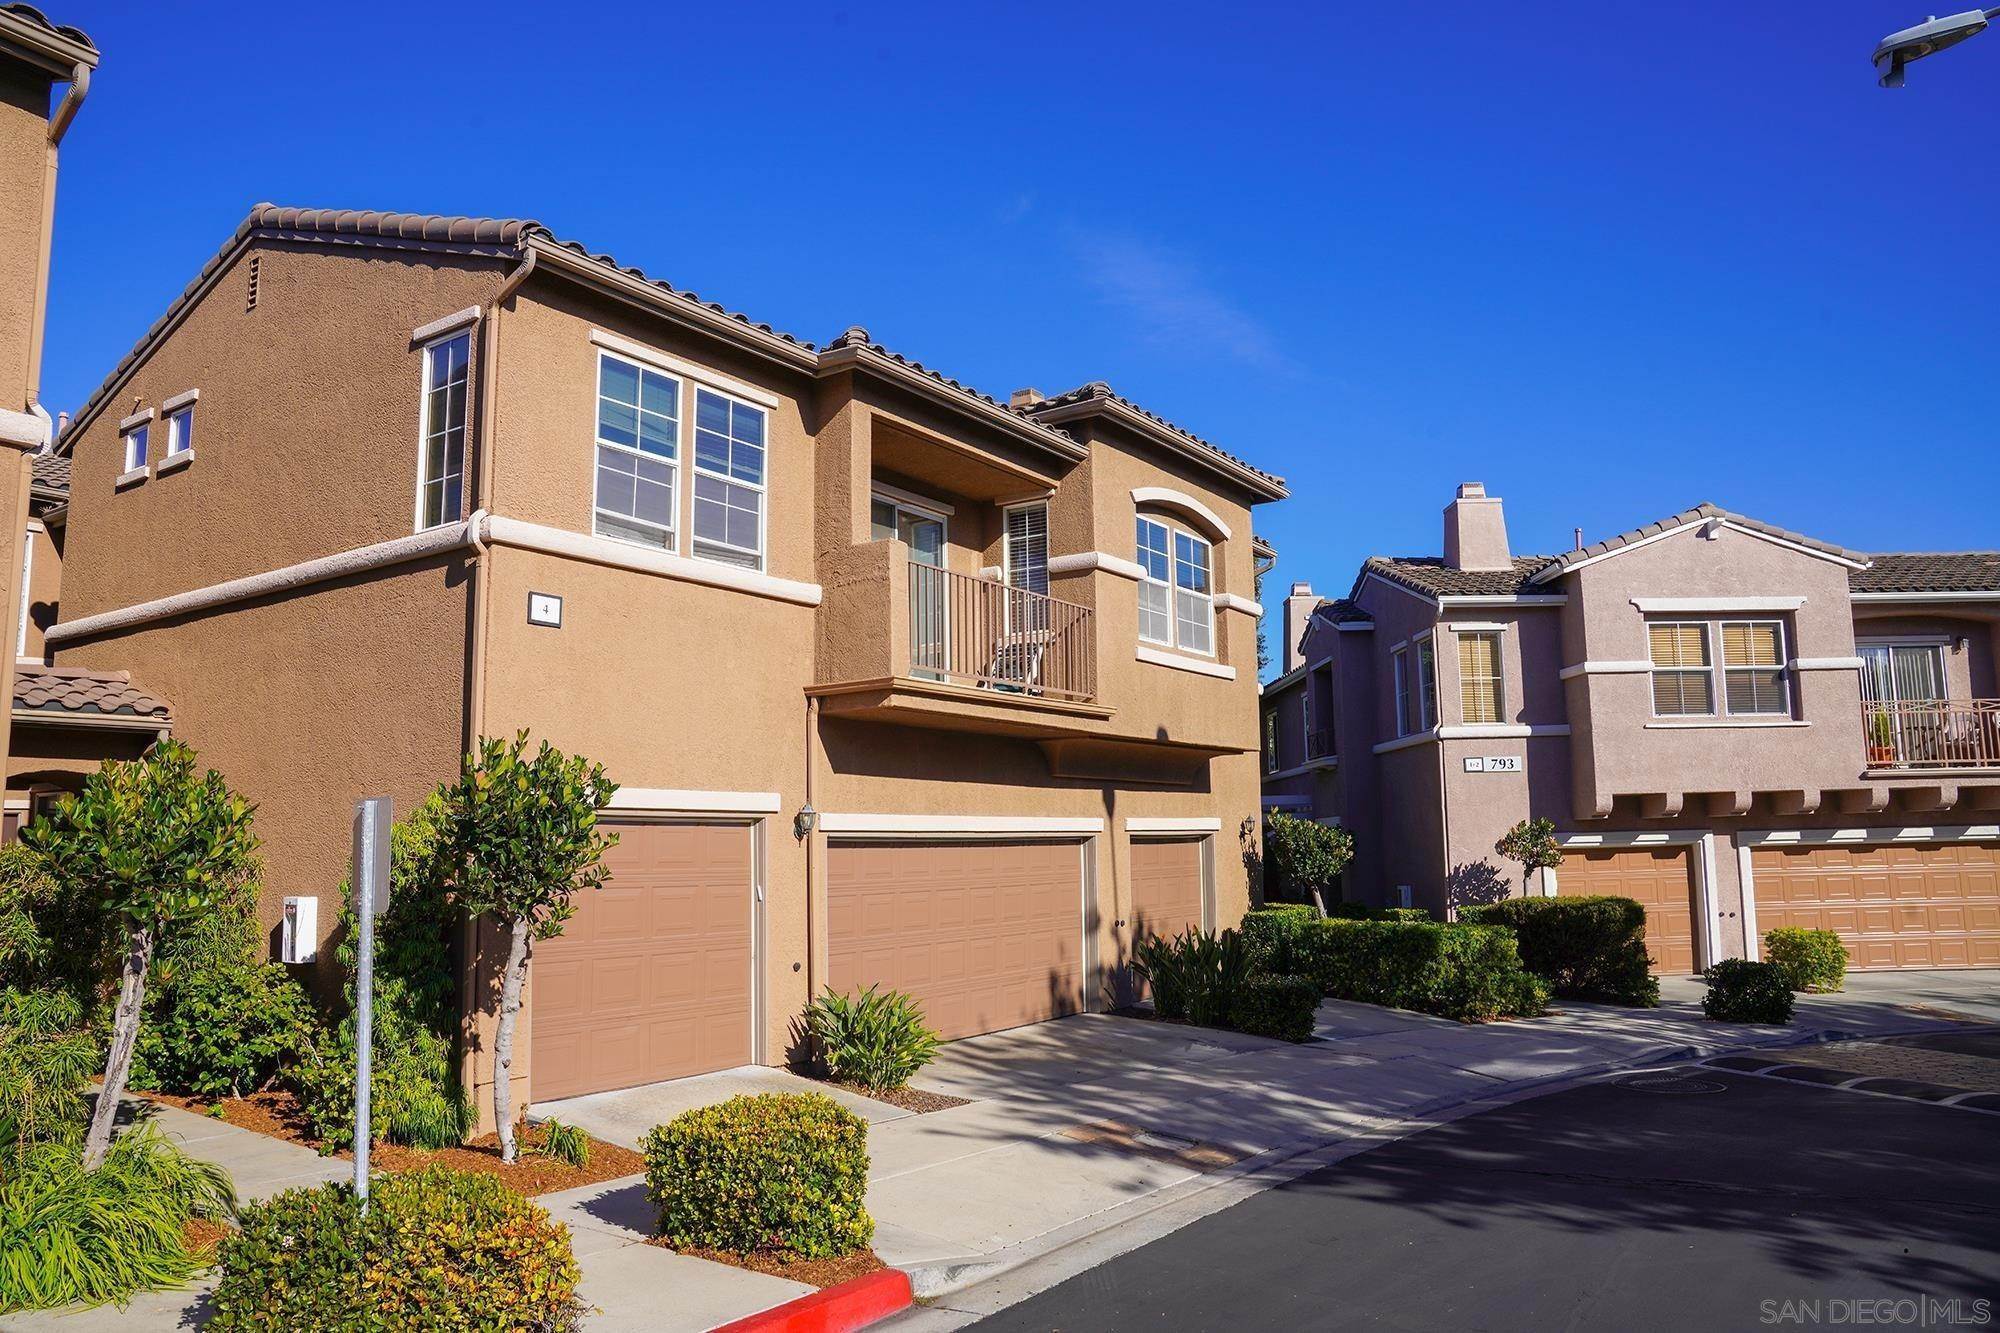 22. Townhouse for Sale at Chula Vista, CA 91913